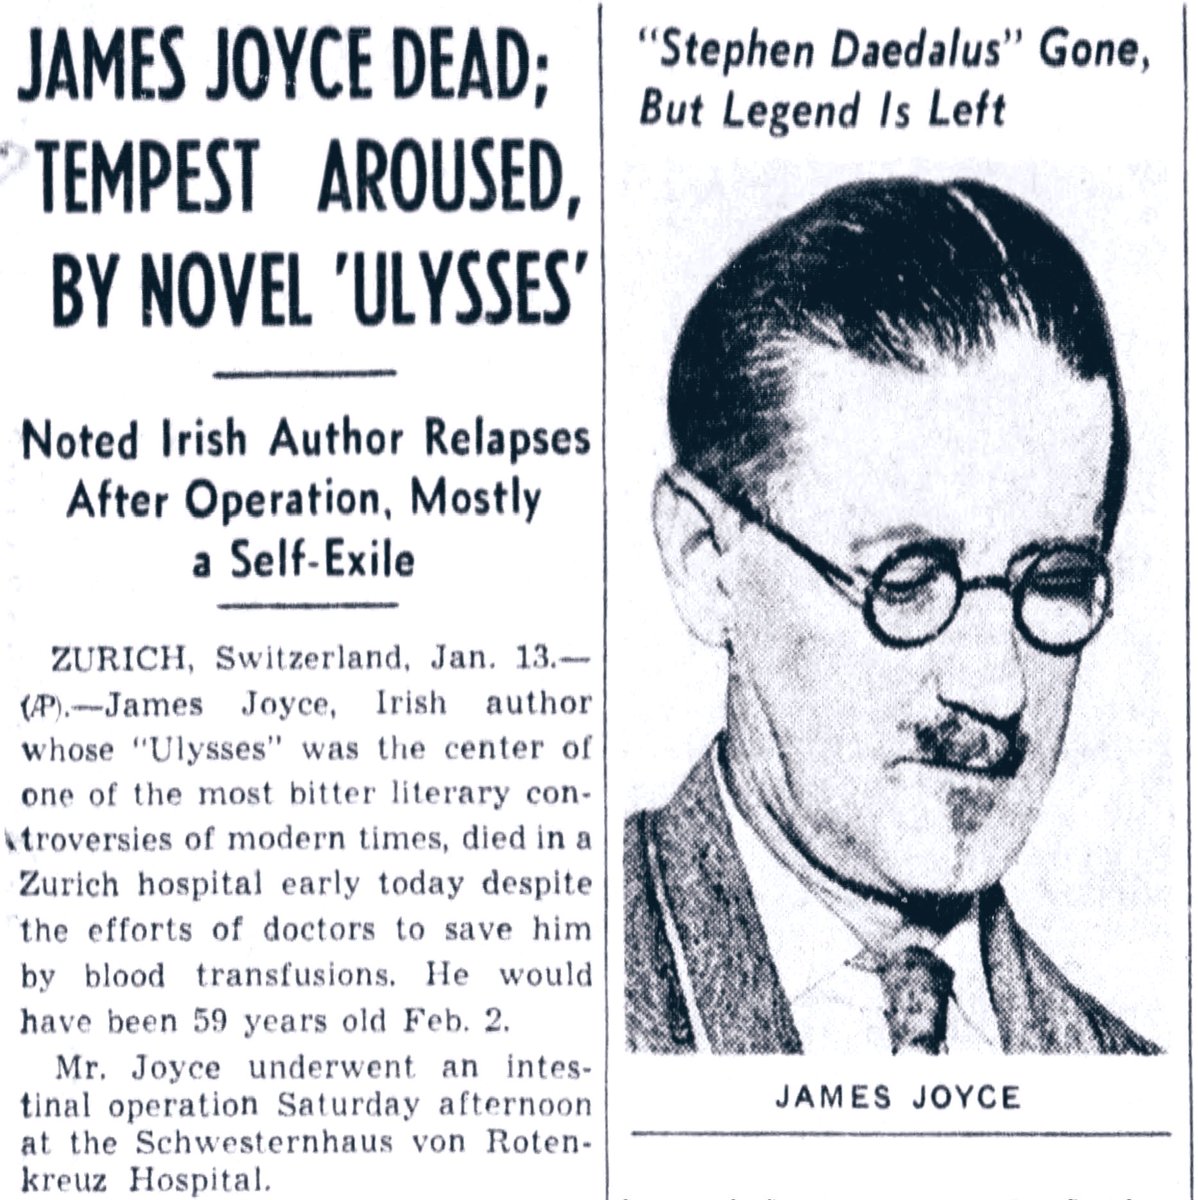 AP news release on January 13, 1941 - James Joyce Dead “… ‘Ulysses’ made him the fountain head of a cult which contributed little, if anything, to the world’s letters and became chiefly known for its incomprehensibility.” 🤔